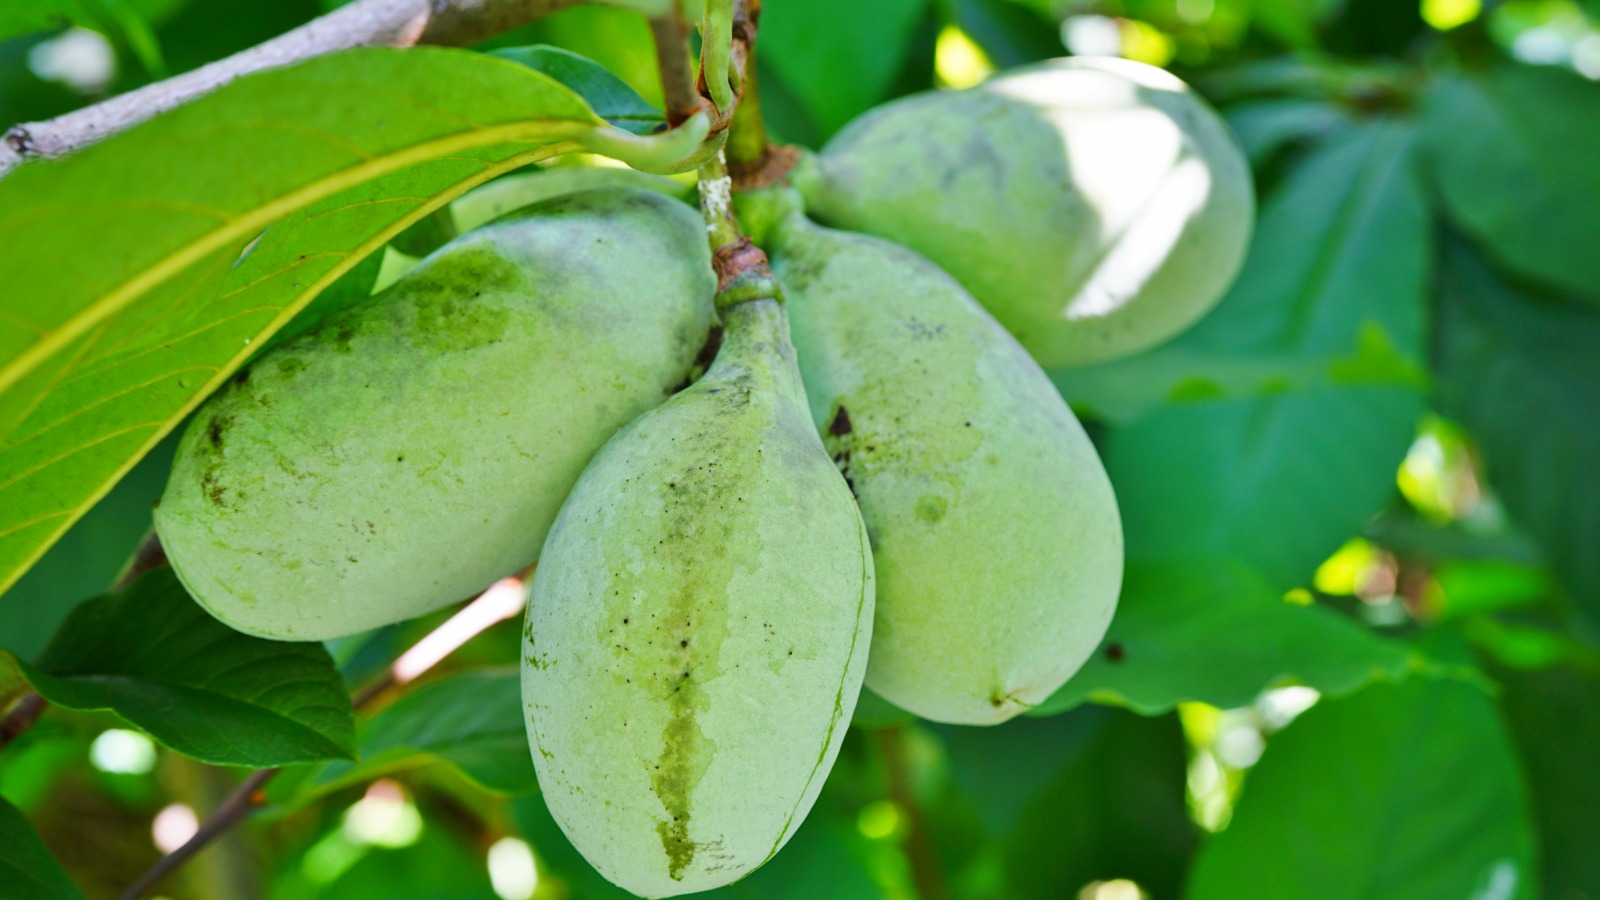 Enhed Billedhugger Sinewi You Should Never Eat The Skin Or Seeds Of Pawpaw. Here's Why